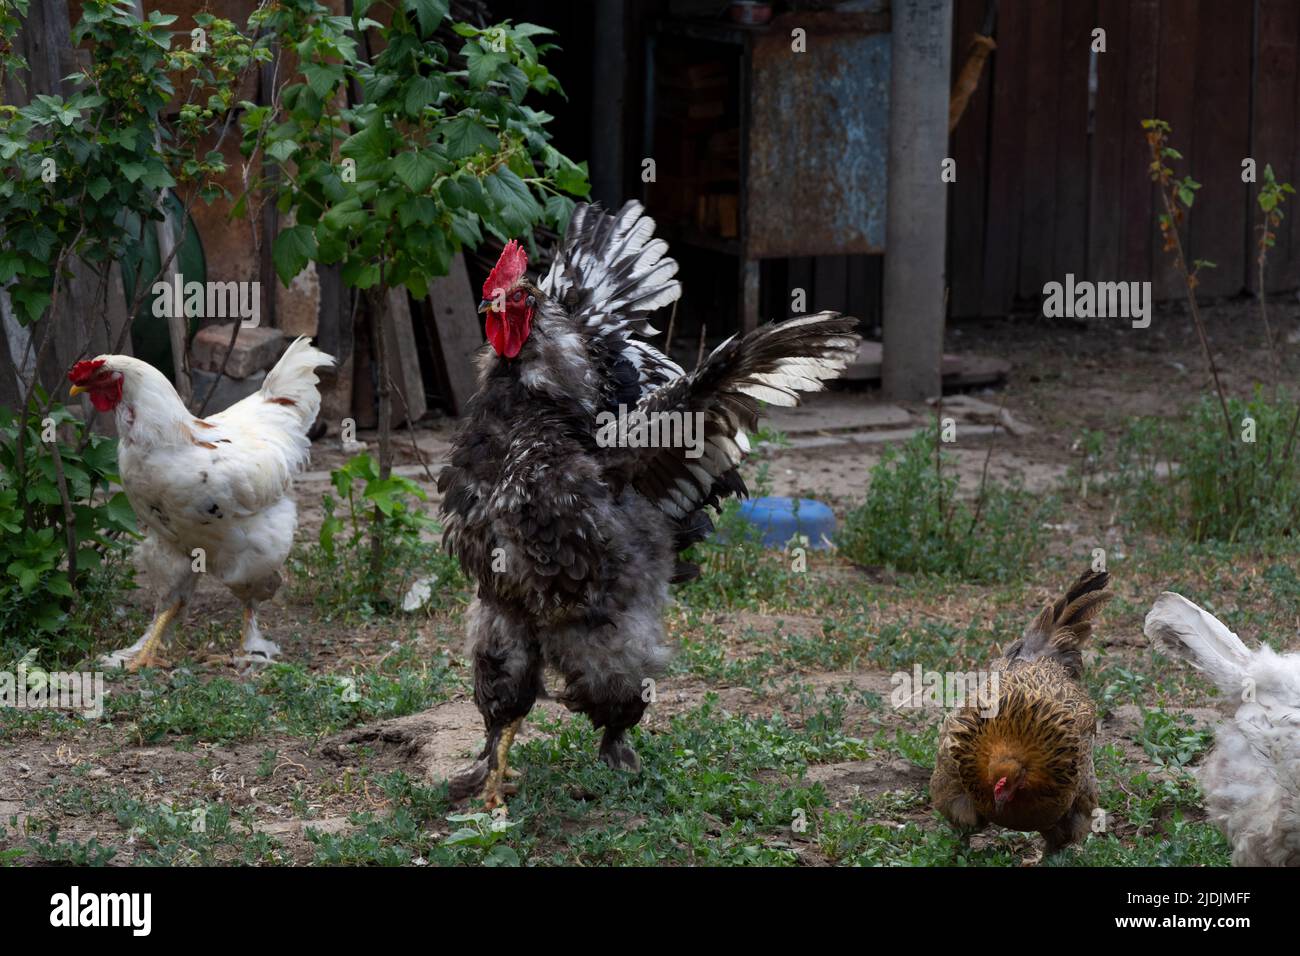 Black and white Rooster spread its wings. Rooster and chickens free range. Backyard Chickens Stock Photo